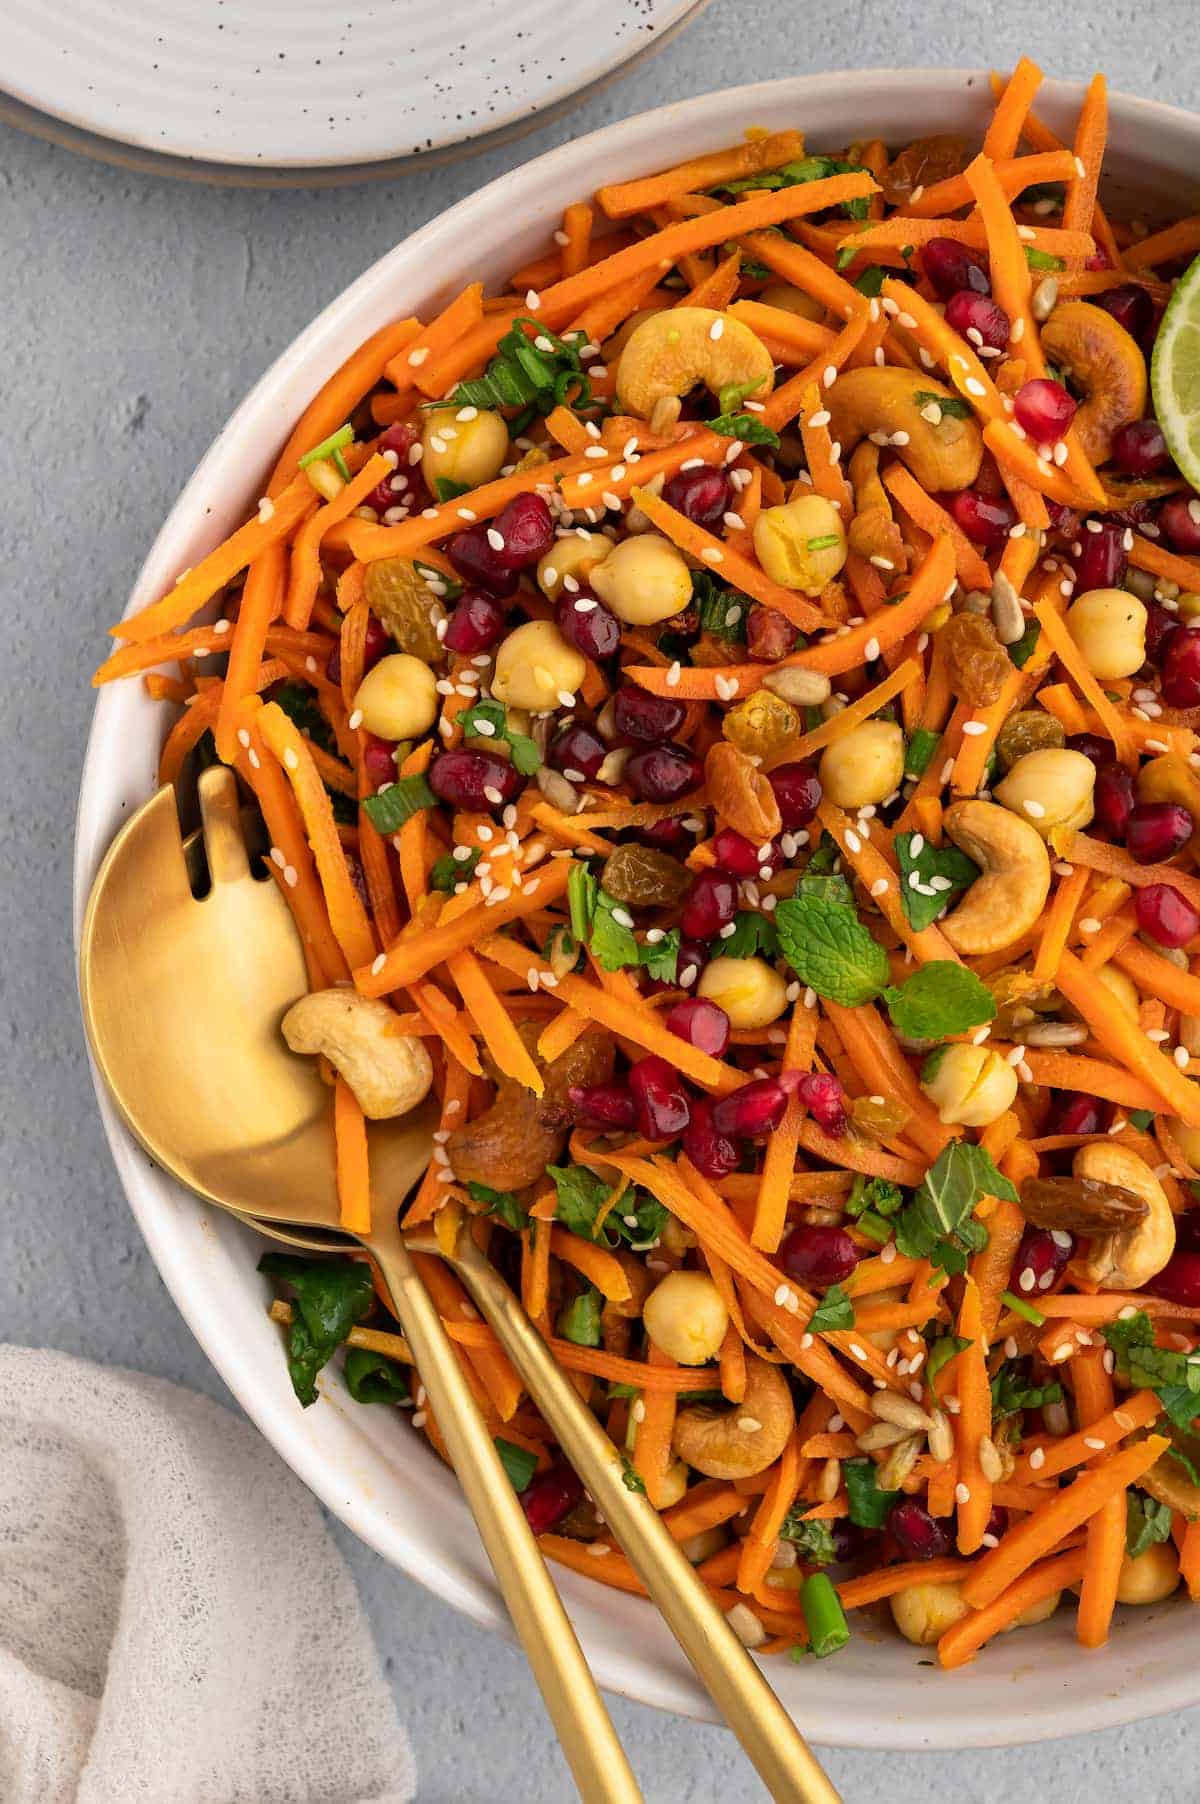 A large bowl of Moroccan carrot salad with gold serving utensils.